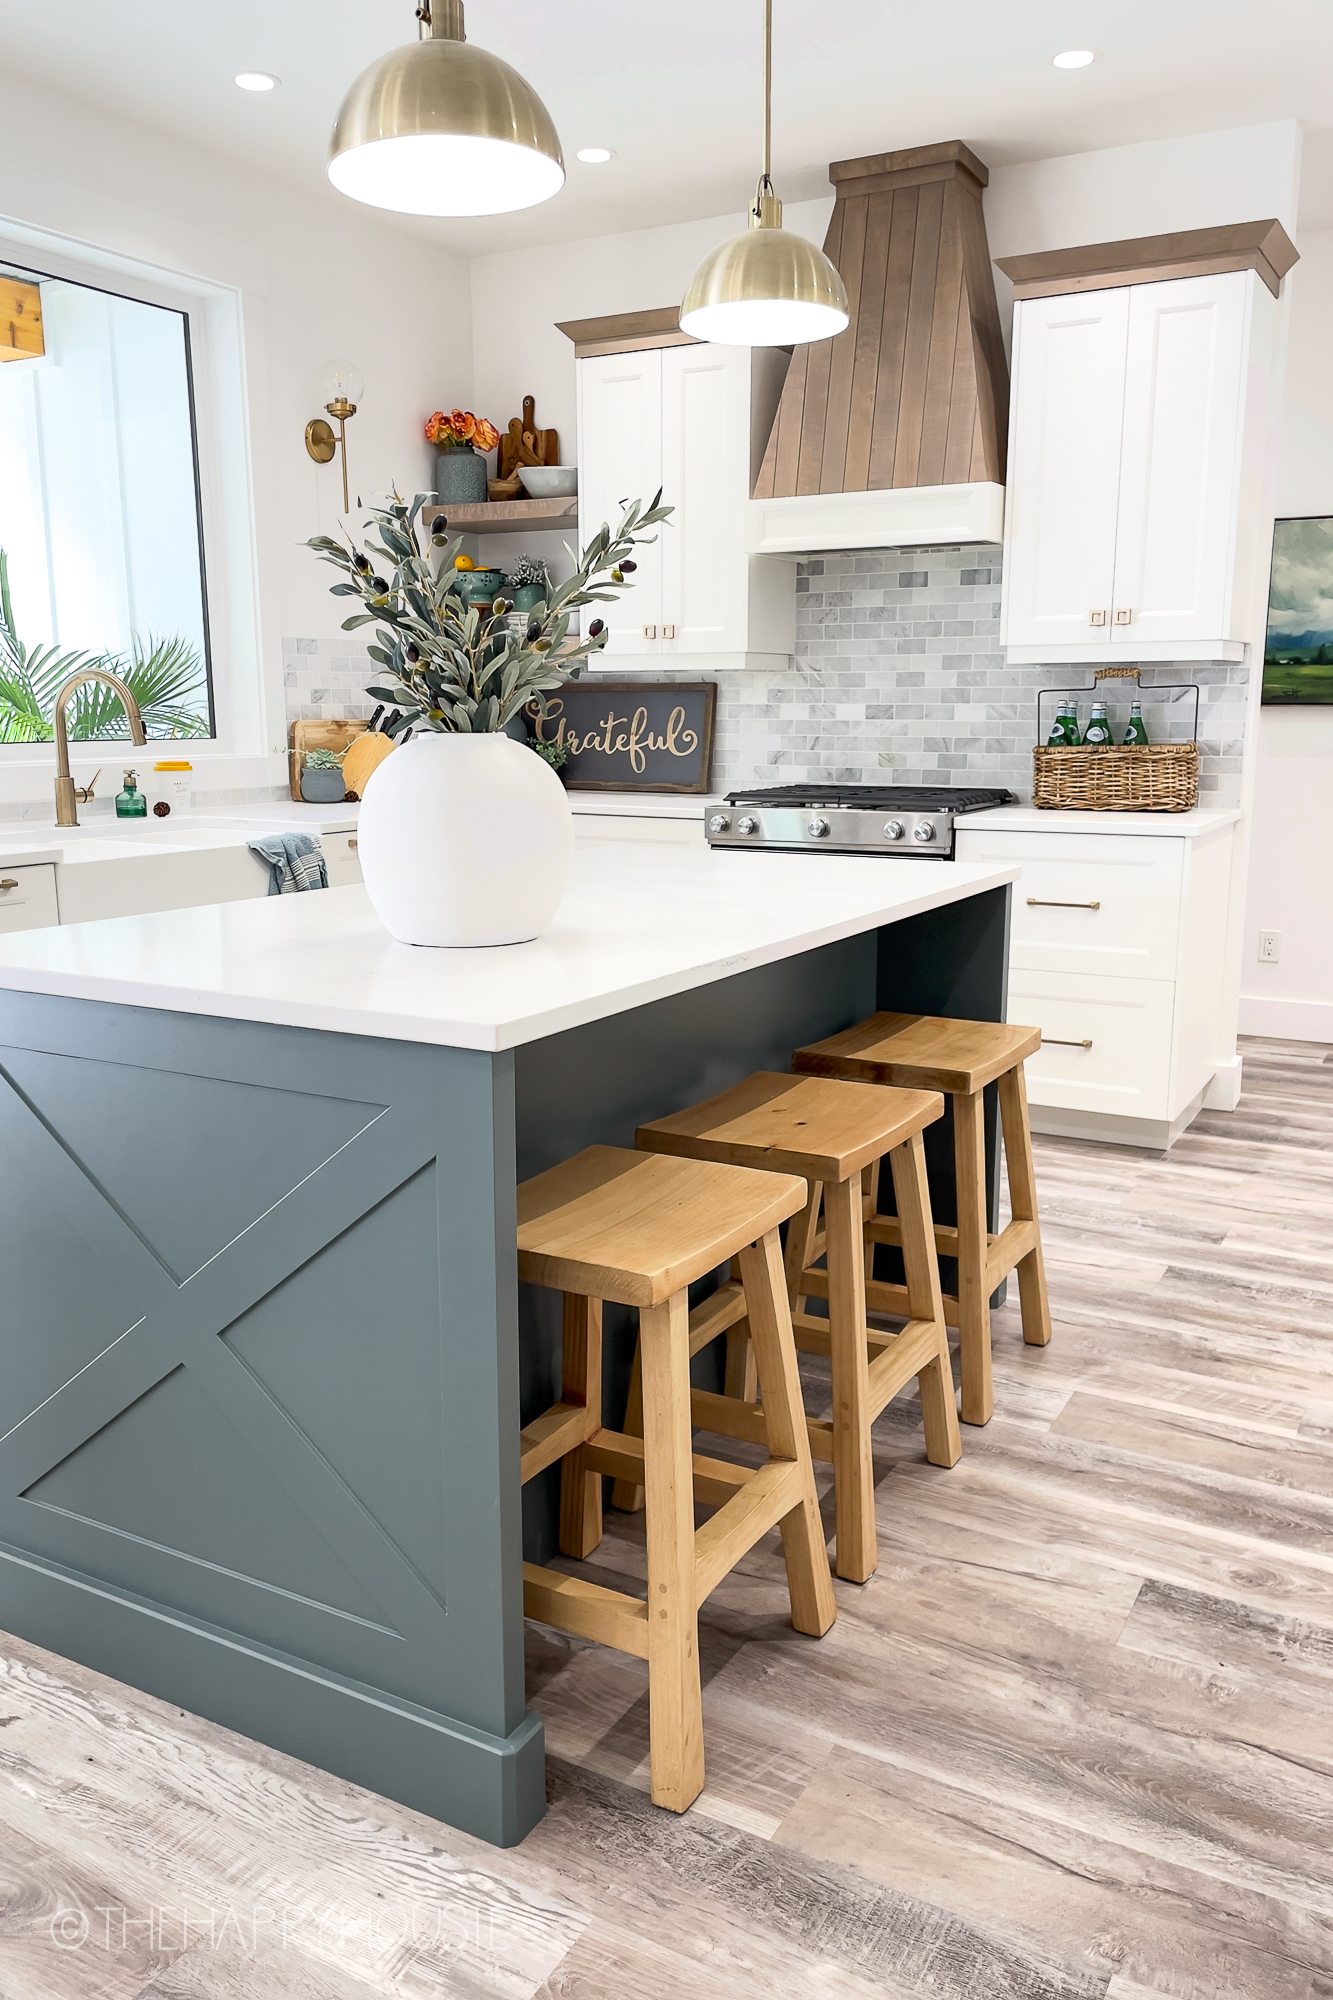 a modern farmhouse kitchen with three tones of white and coloured cabinetry as well as wood cabinet accents